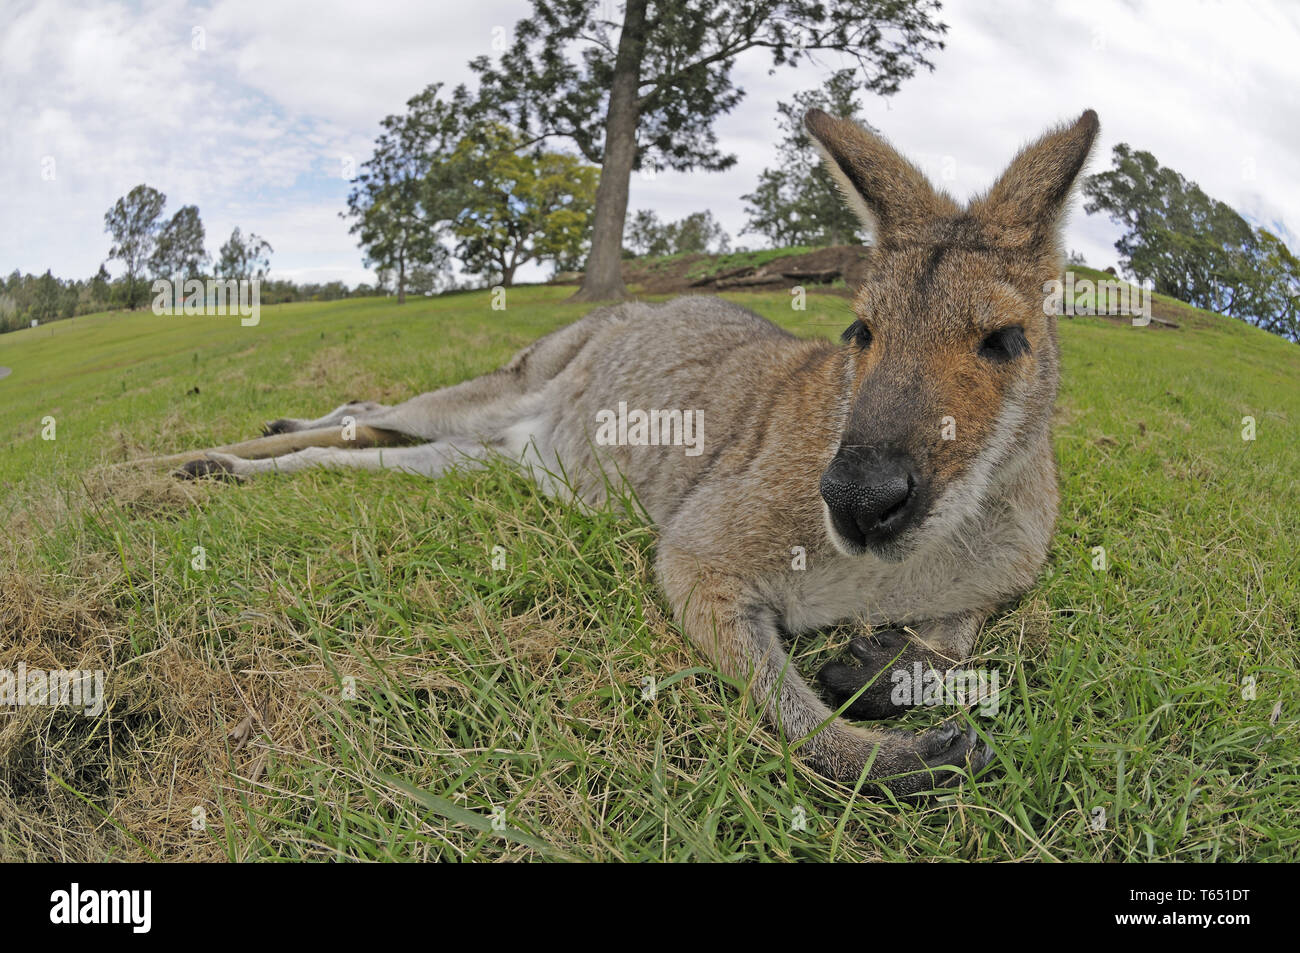 red-necked wallaby or Bennett's wallaby (Macropus rufogriseus) Stock Photo